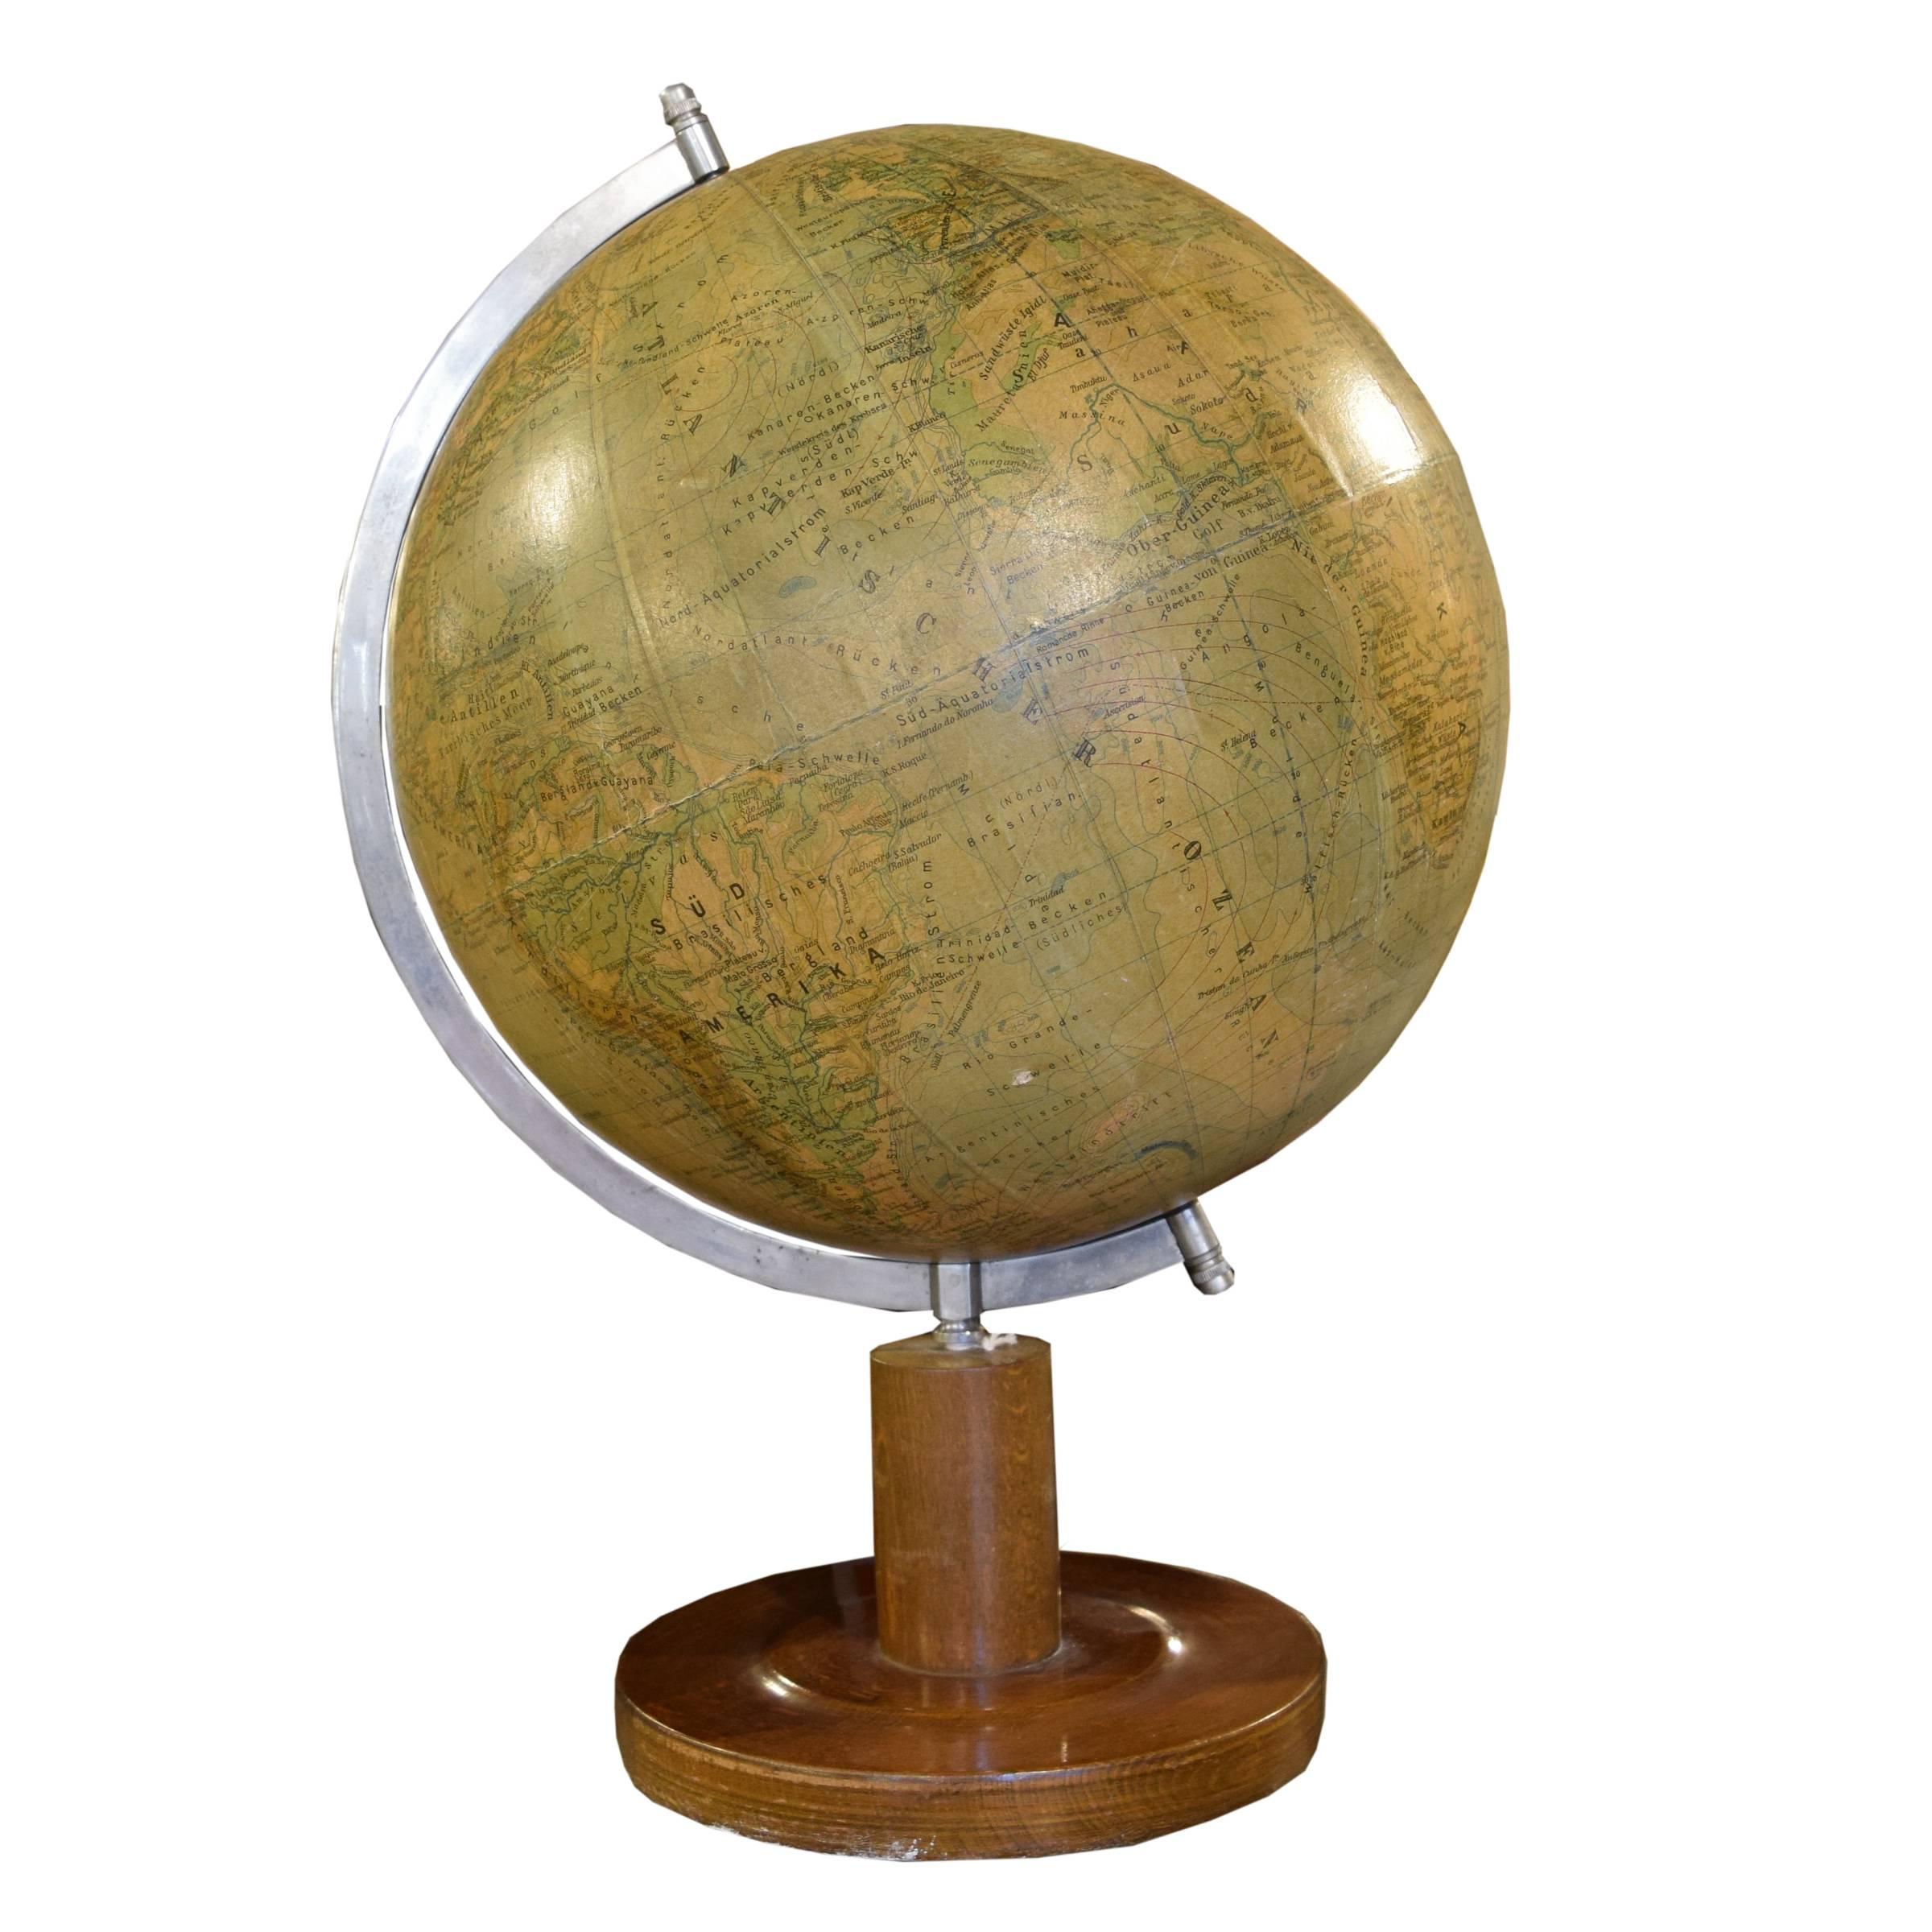 A very nice German spinning globe mounted on a circular wood stand, early 20th century.
 